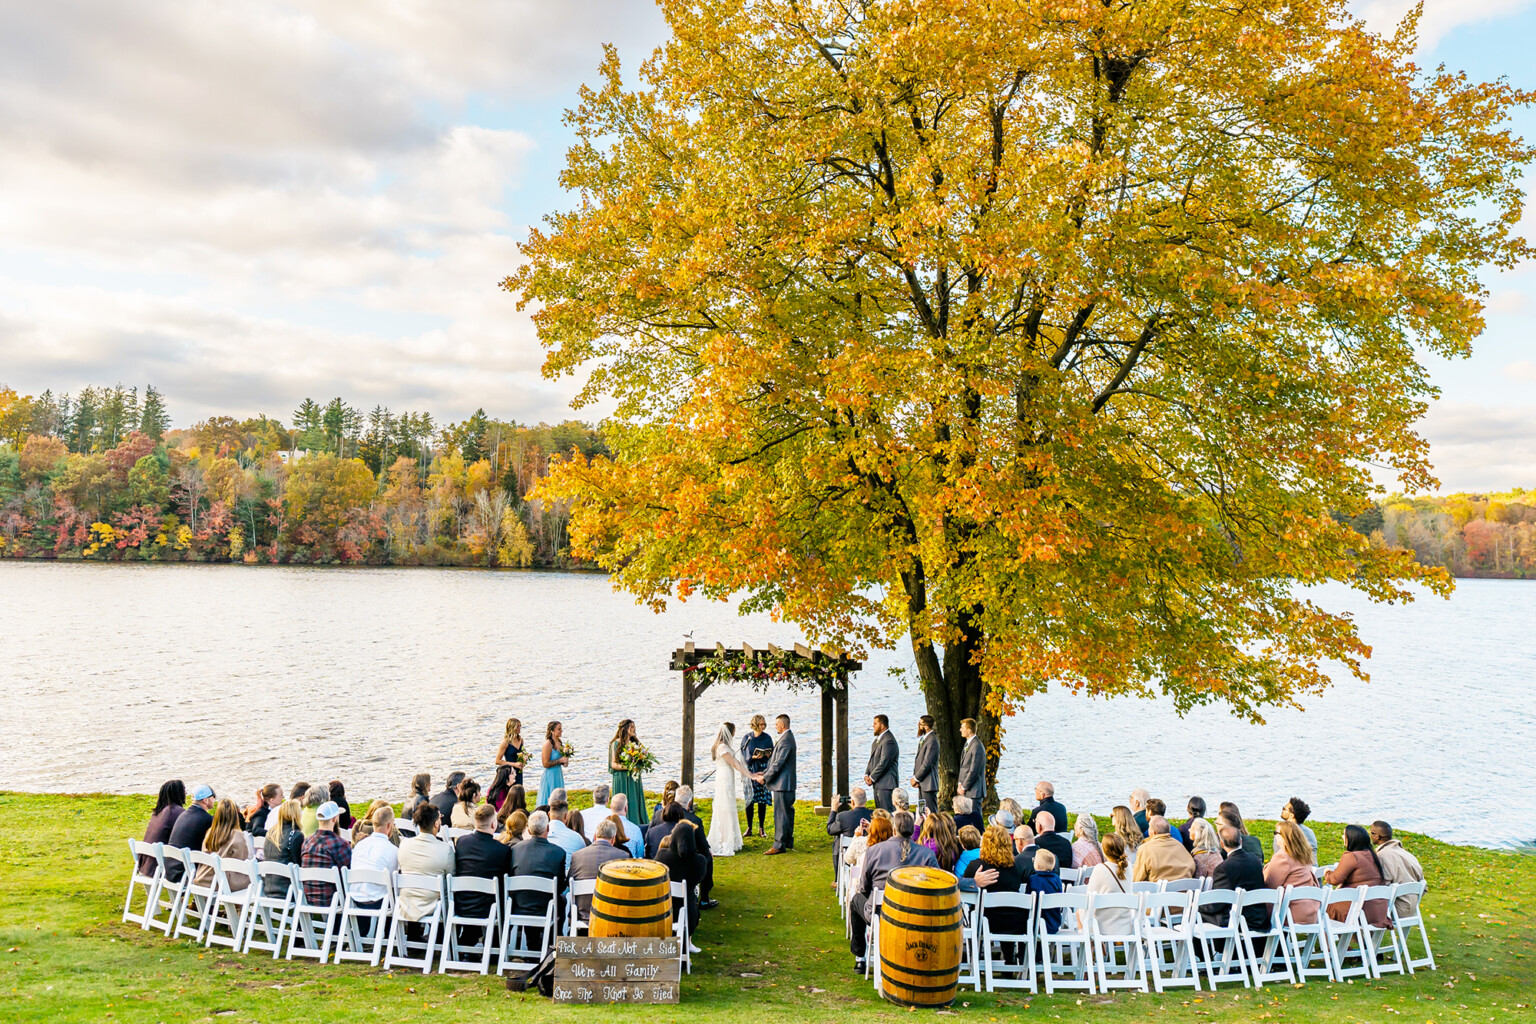 Ceremony at the lakeside arbor.